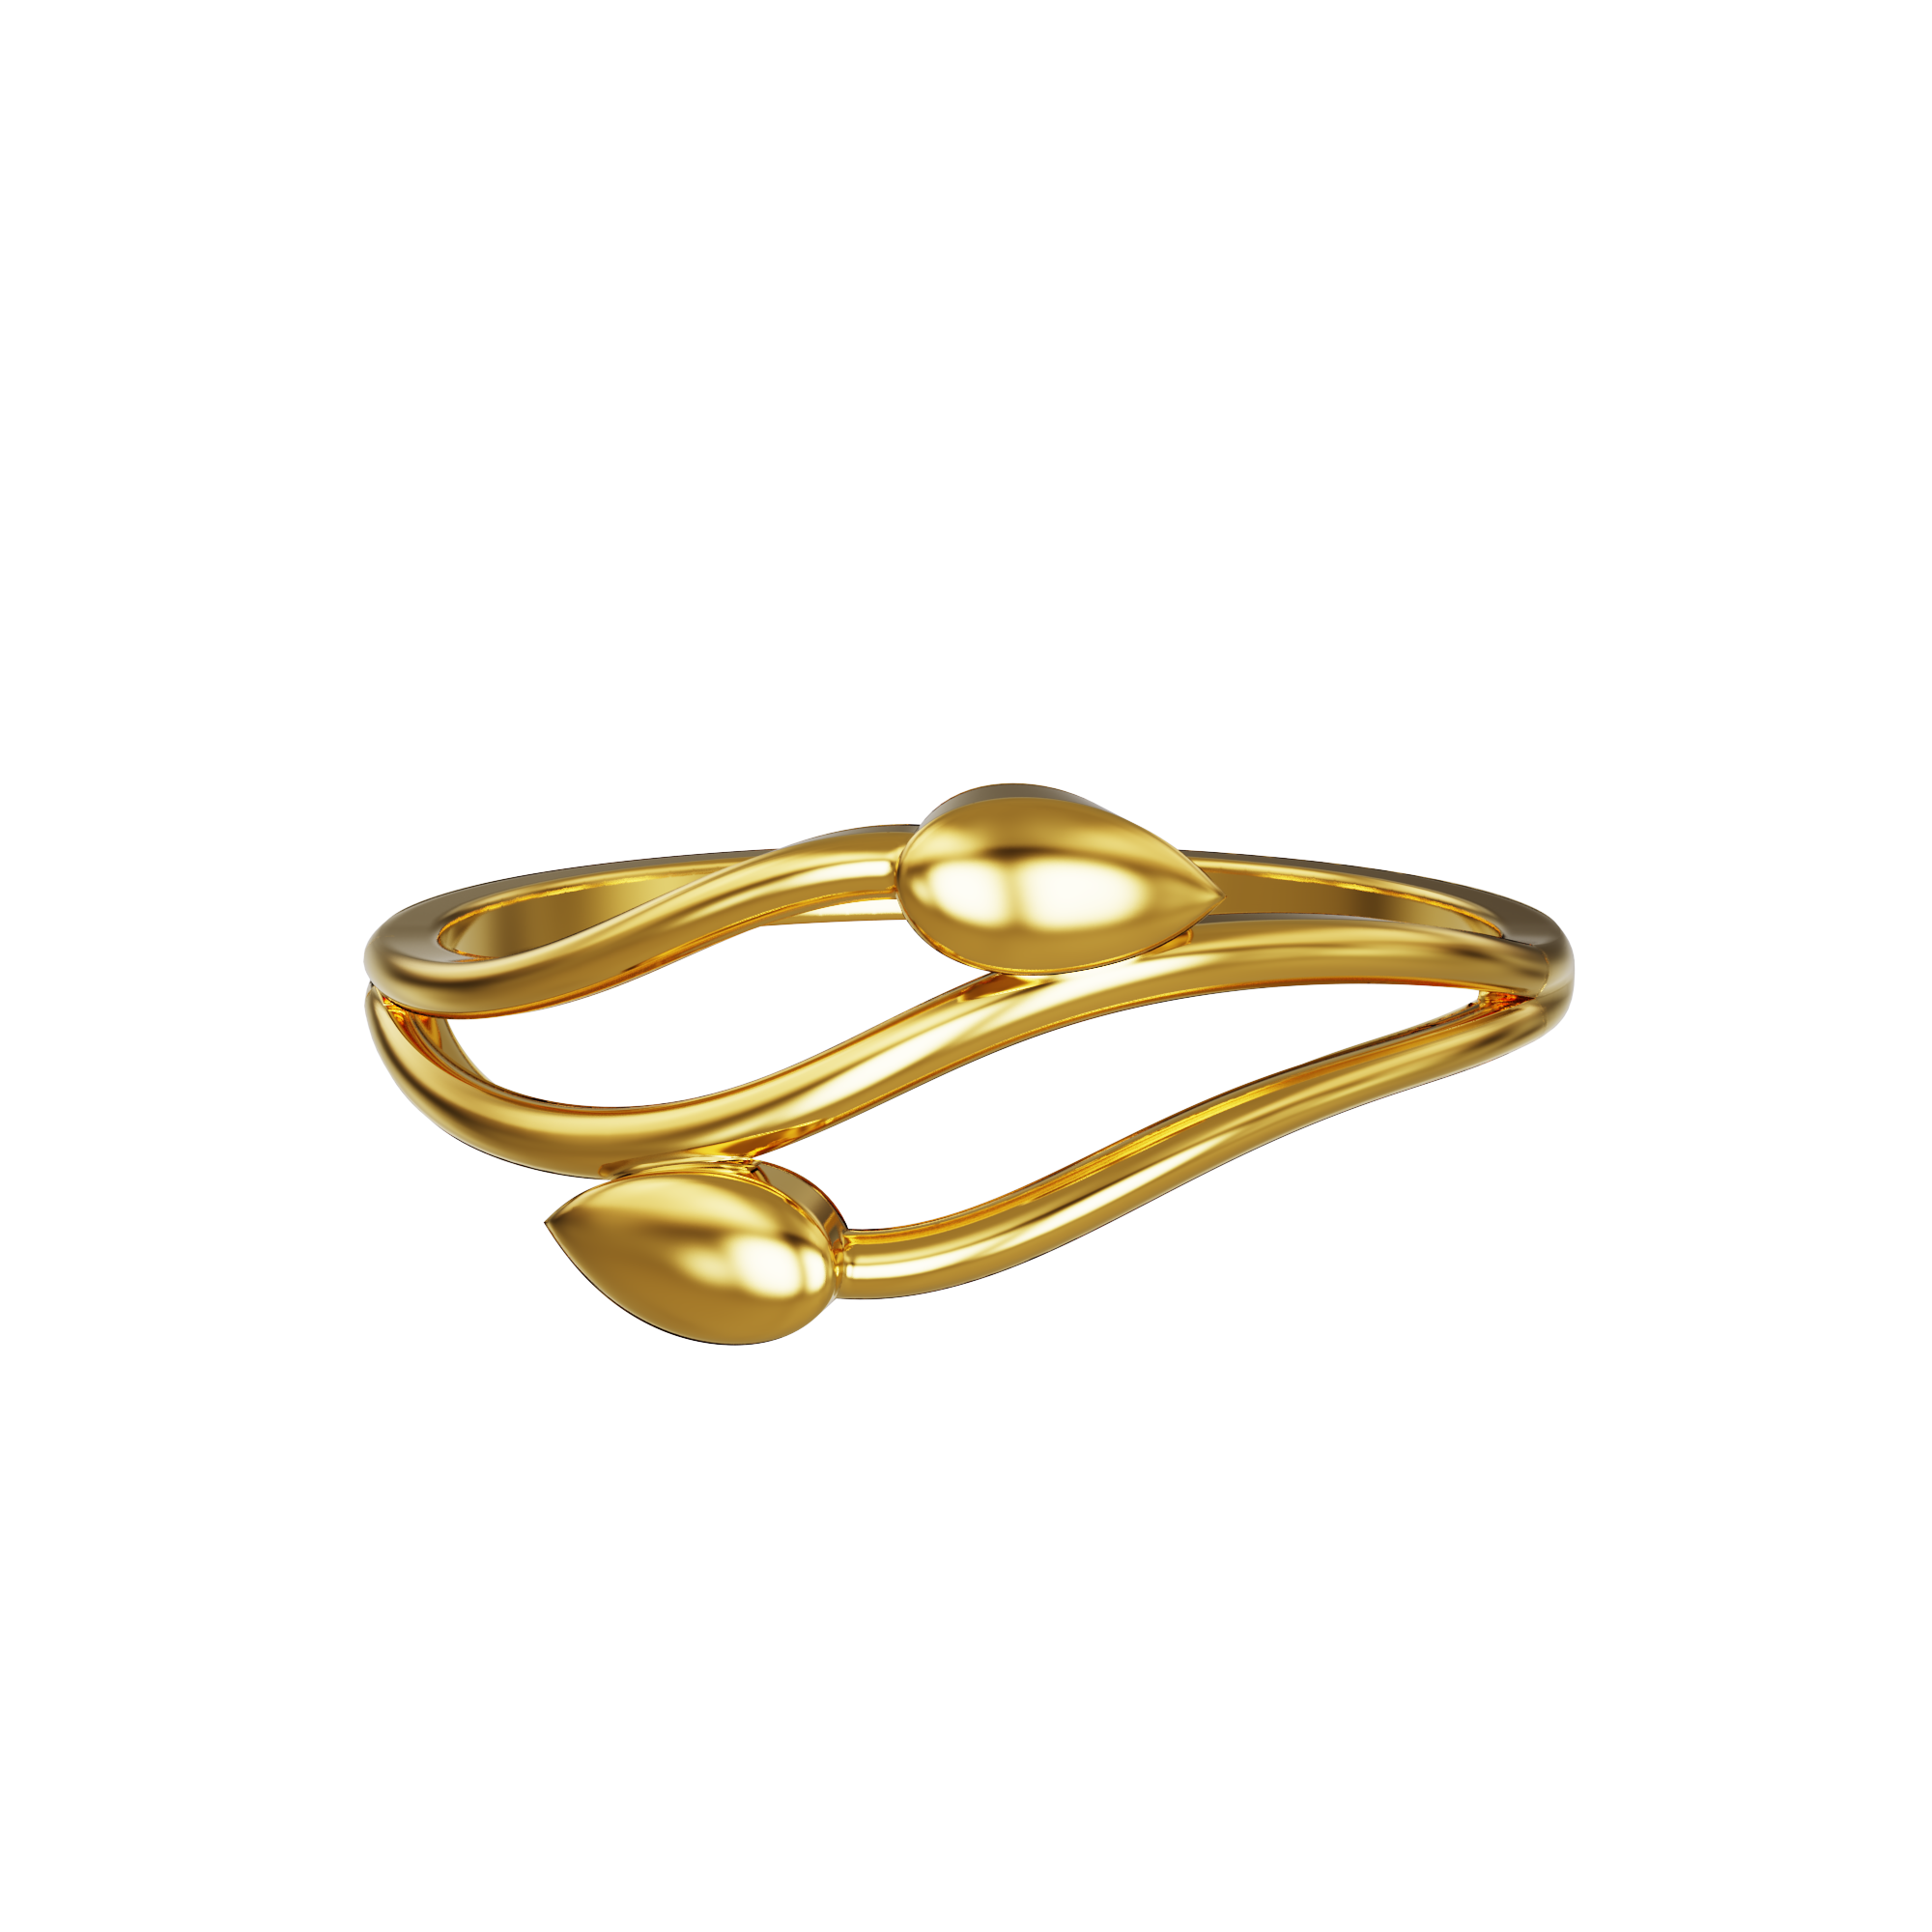 Latest Light 22k Gold Ring Designs with Weight and Price | Today Fashion | Gold  ring designs, 22k gold ring, Ring designs